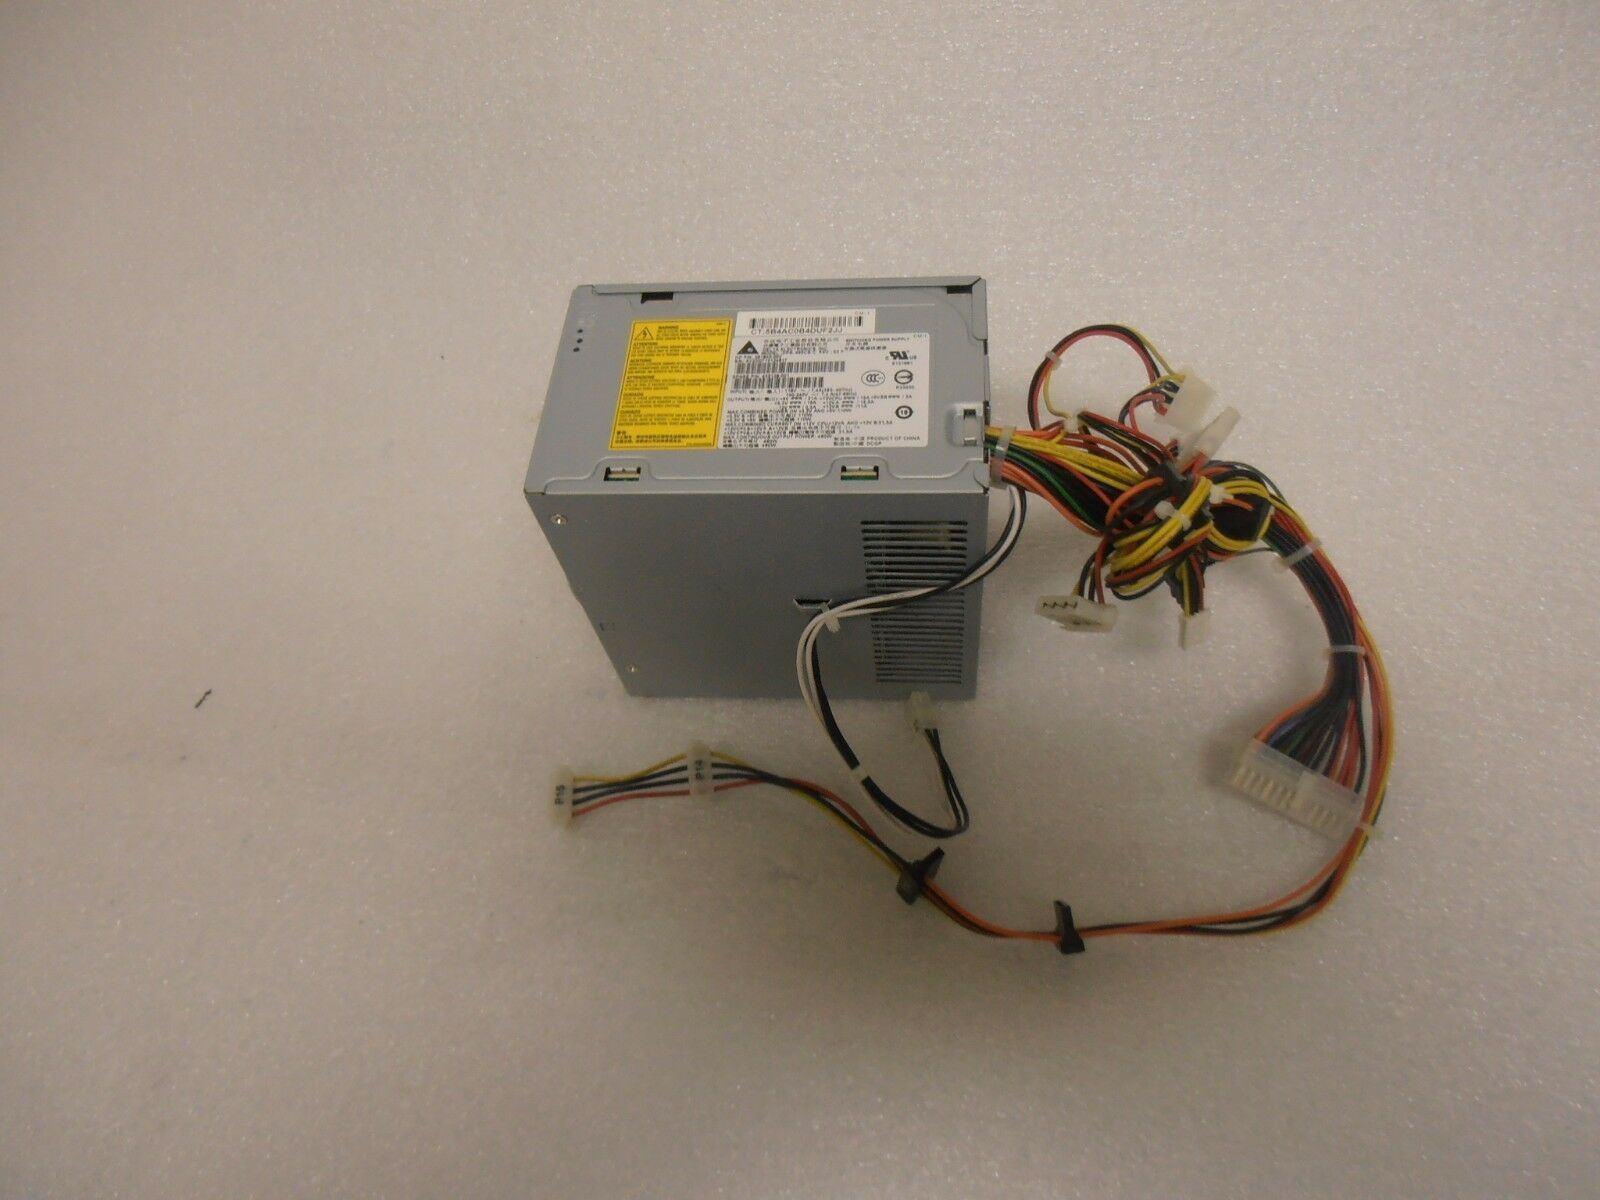 381840 002 DPS 460CB 435128 001 power supply assembly input 100 240vac output 460 watt wide ranging active power factor correction pfc